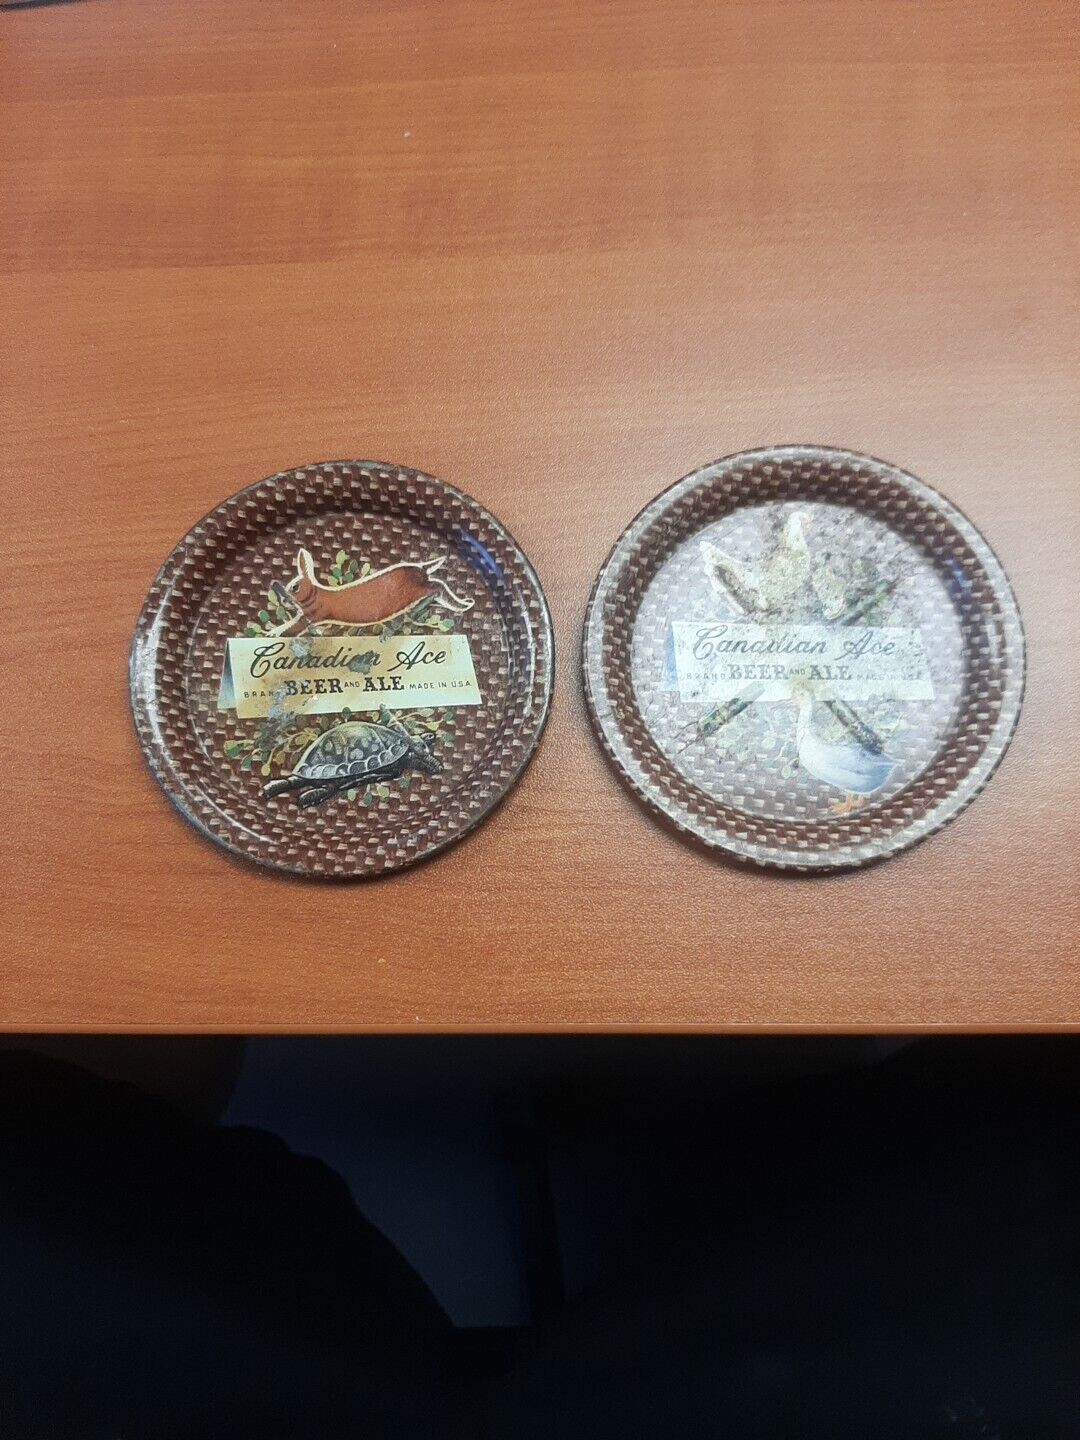 2 Vintage Canadian Ace Beer Tip Tray